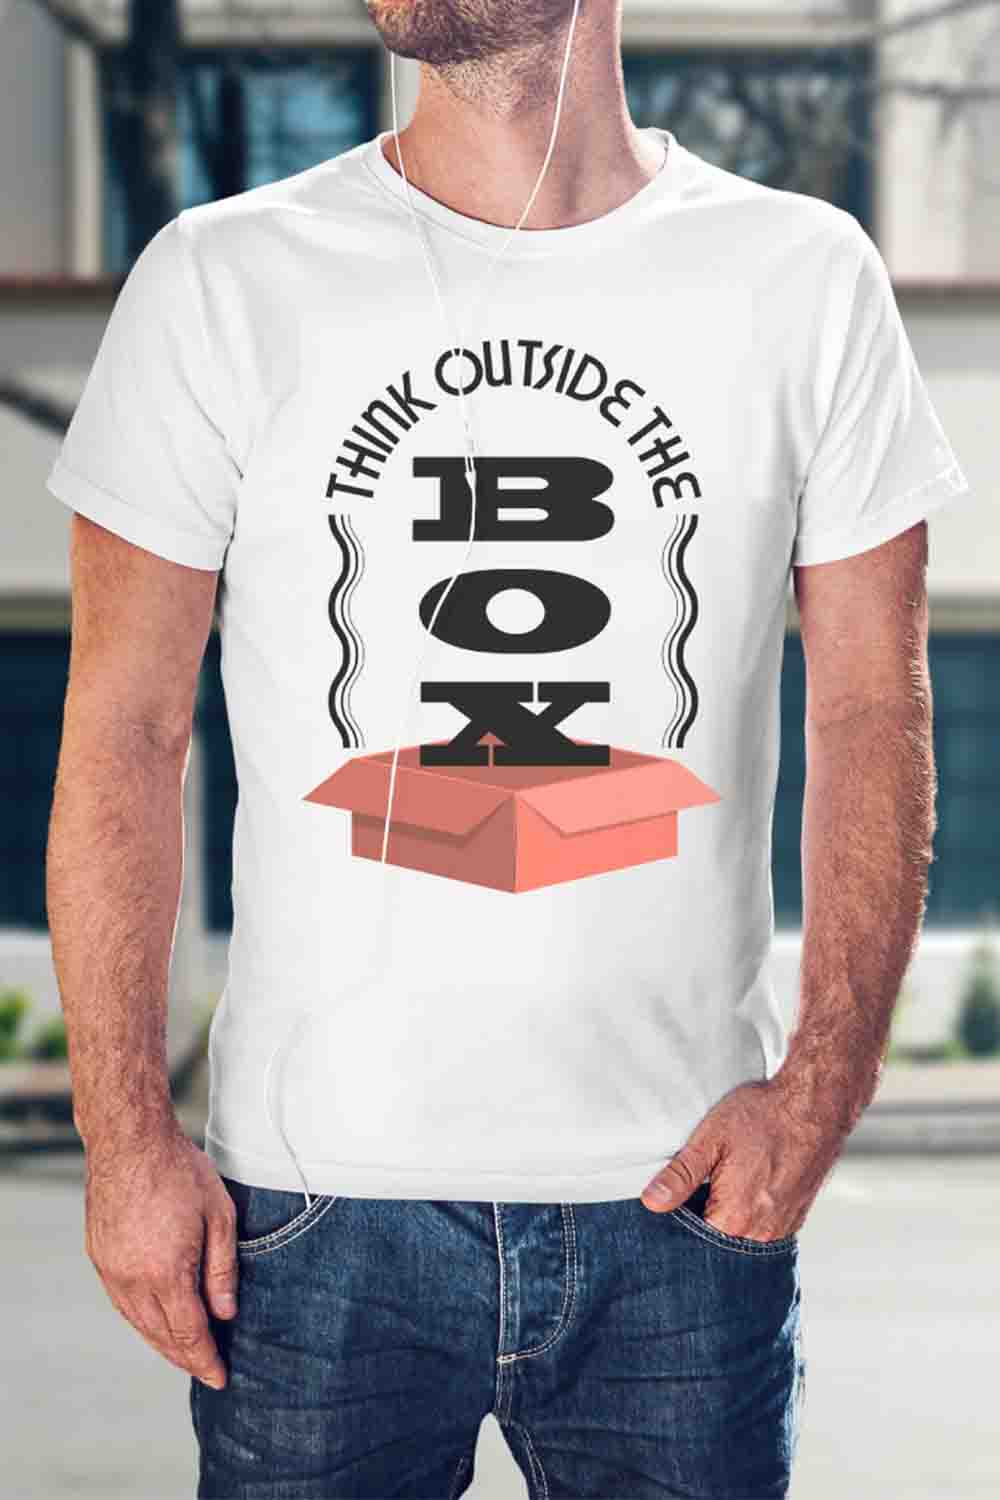 Think outside the box tshirt design pinterest preview image.